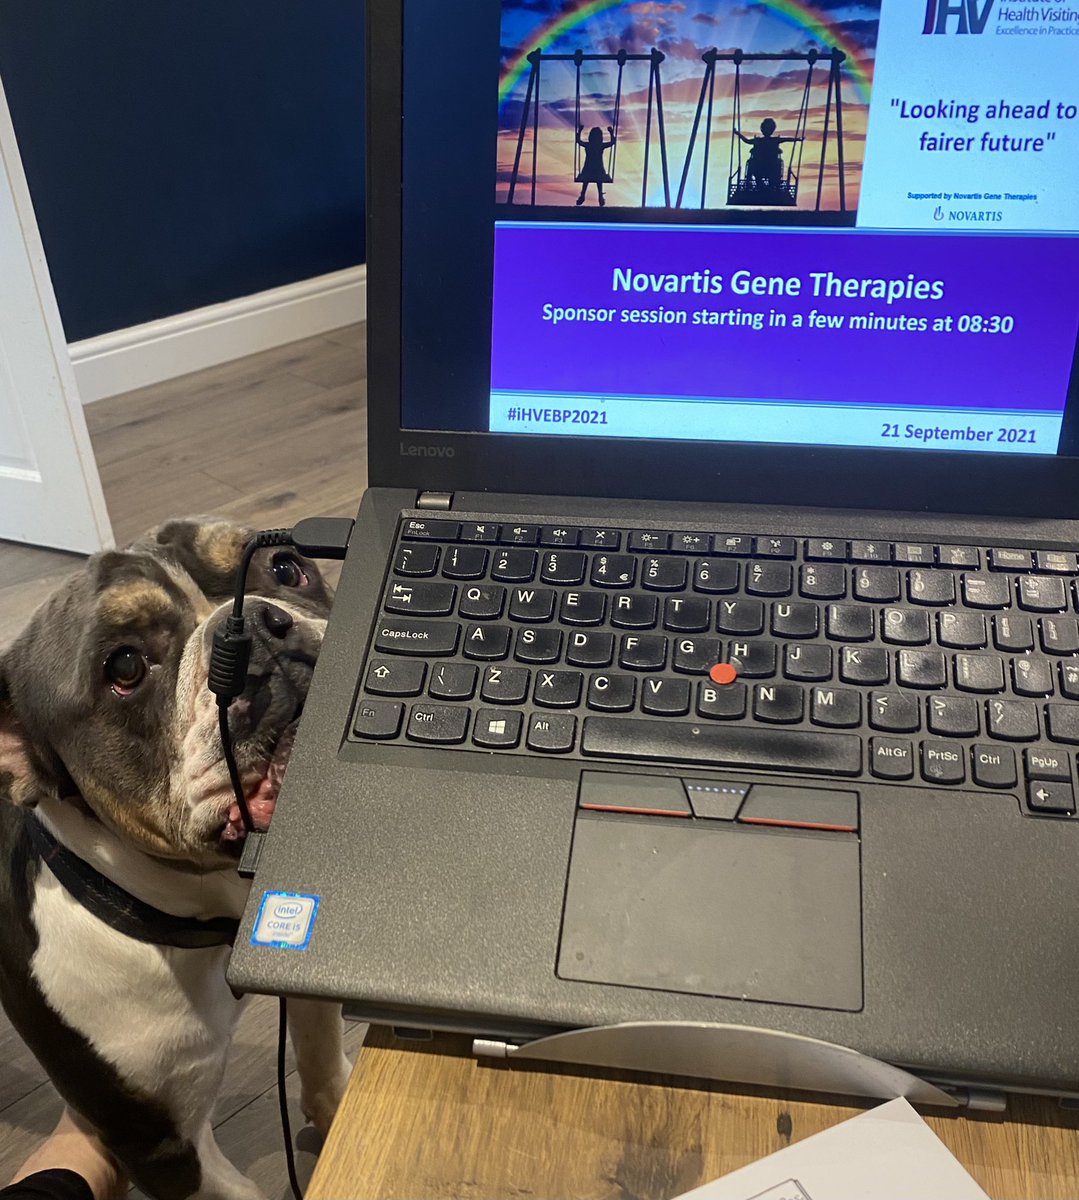 The best thing about virtual conferences is having a table to write on and the dog to keep me company! So looking forward to today’s conference #iHVEBP2021